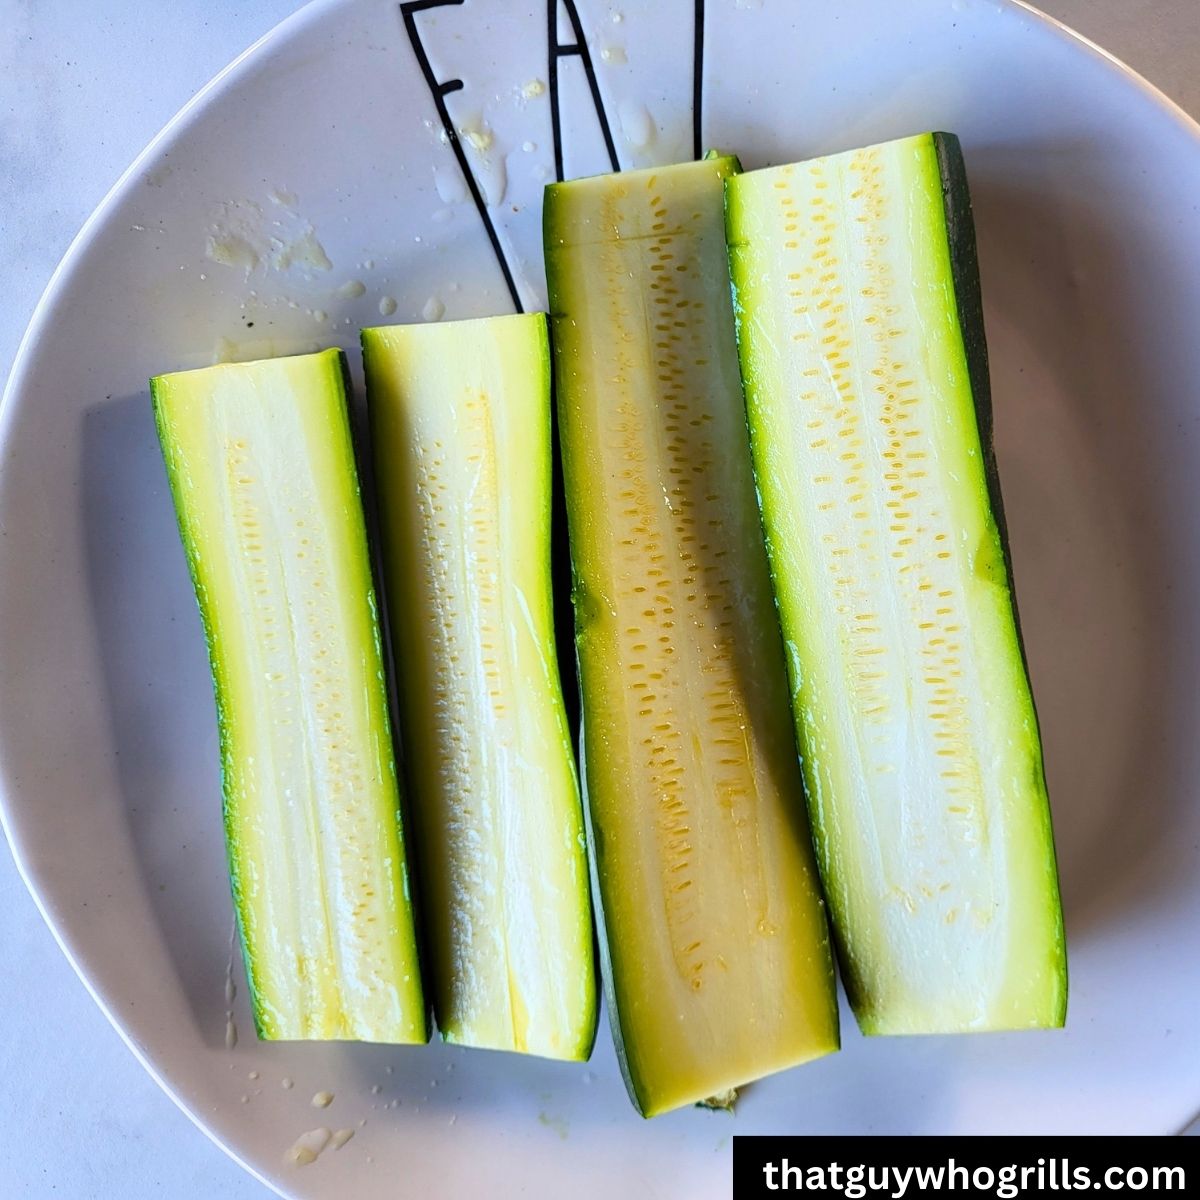 Zucchini sliced before seasoning and grilling